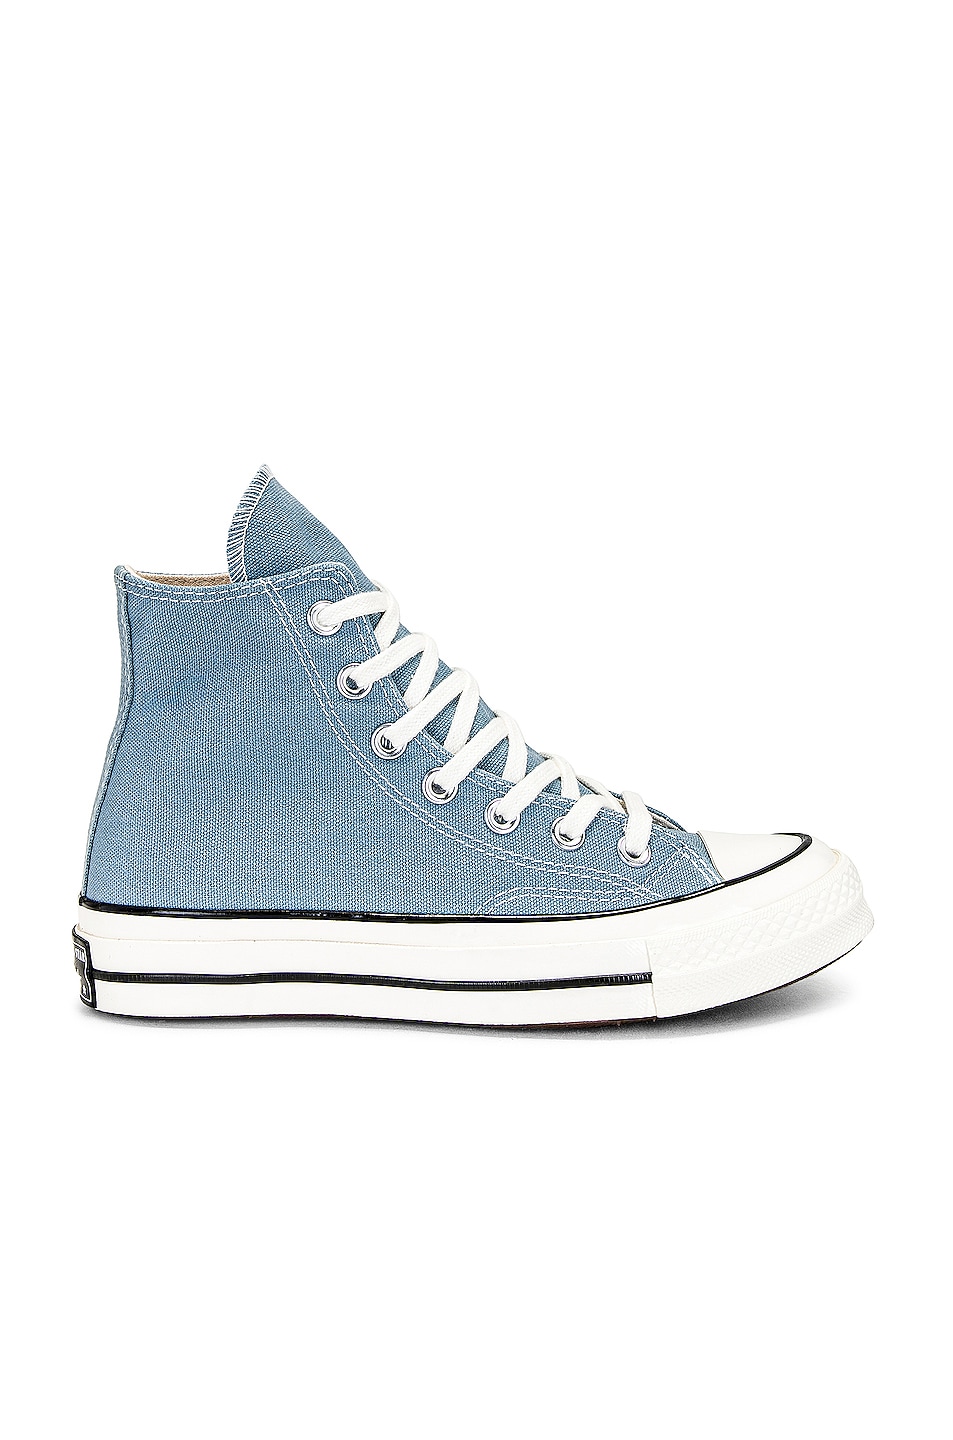 Image 1 of Converse Chuck 70 High Tops in Cocoon Blue, Egret, & Black